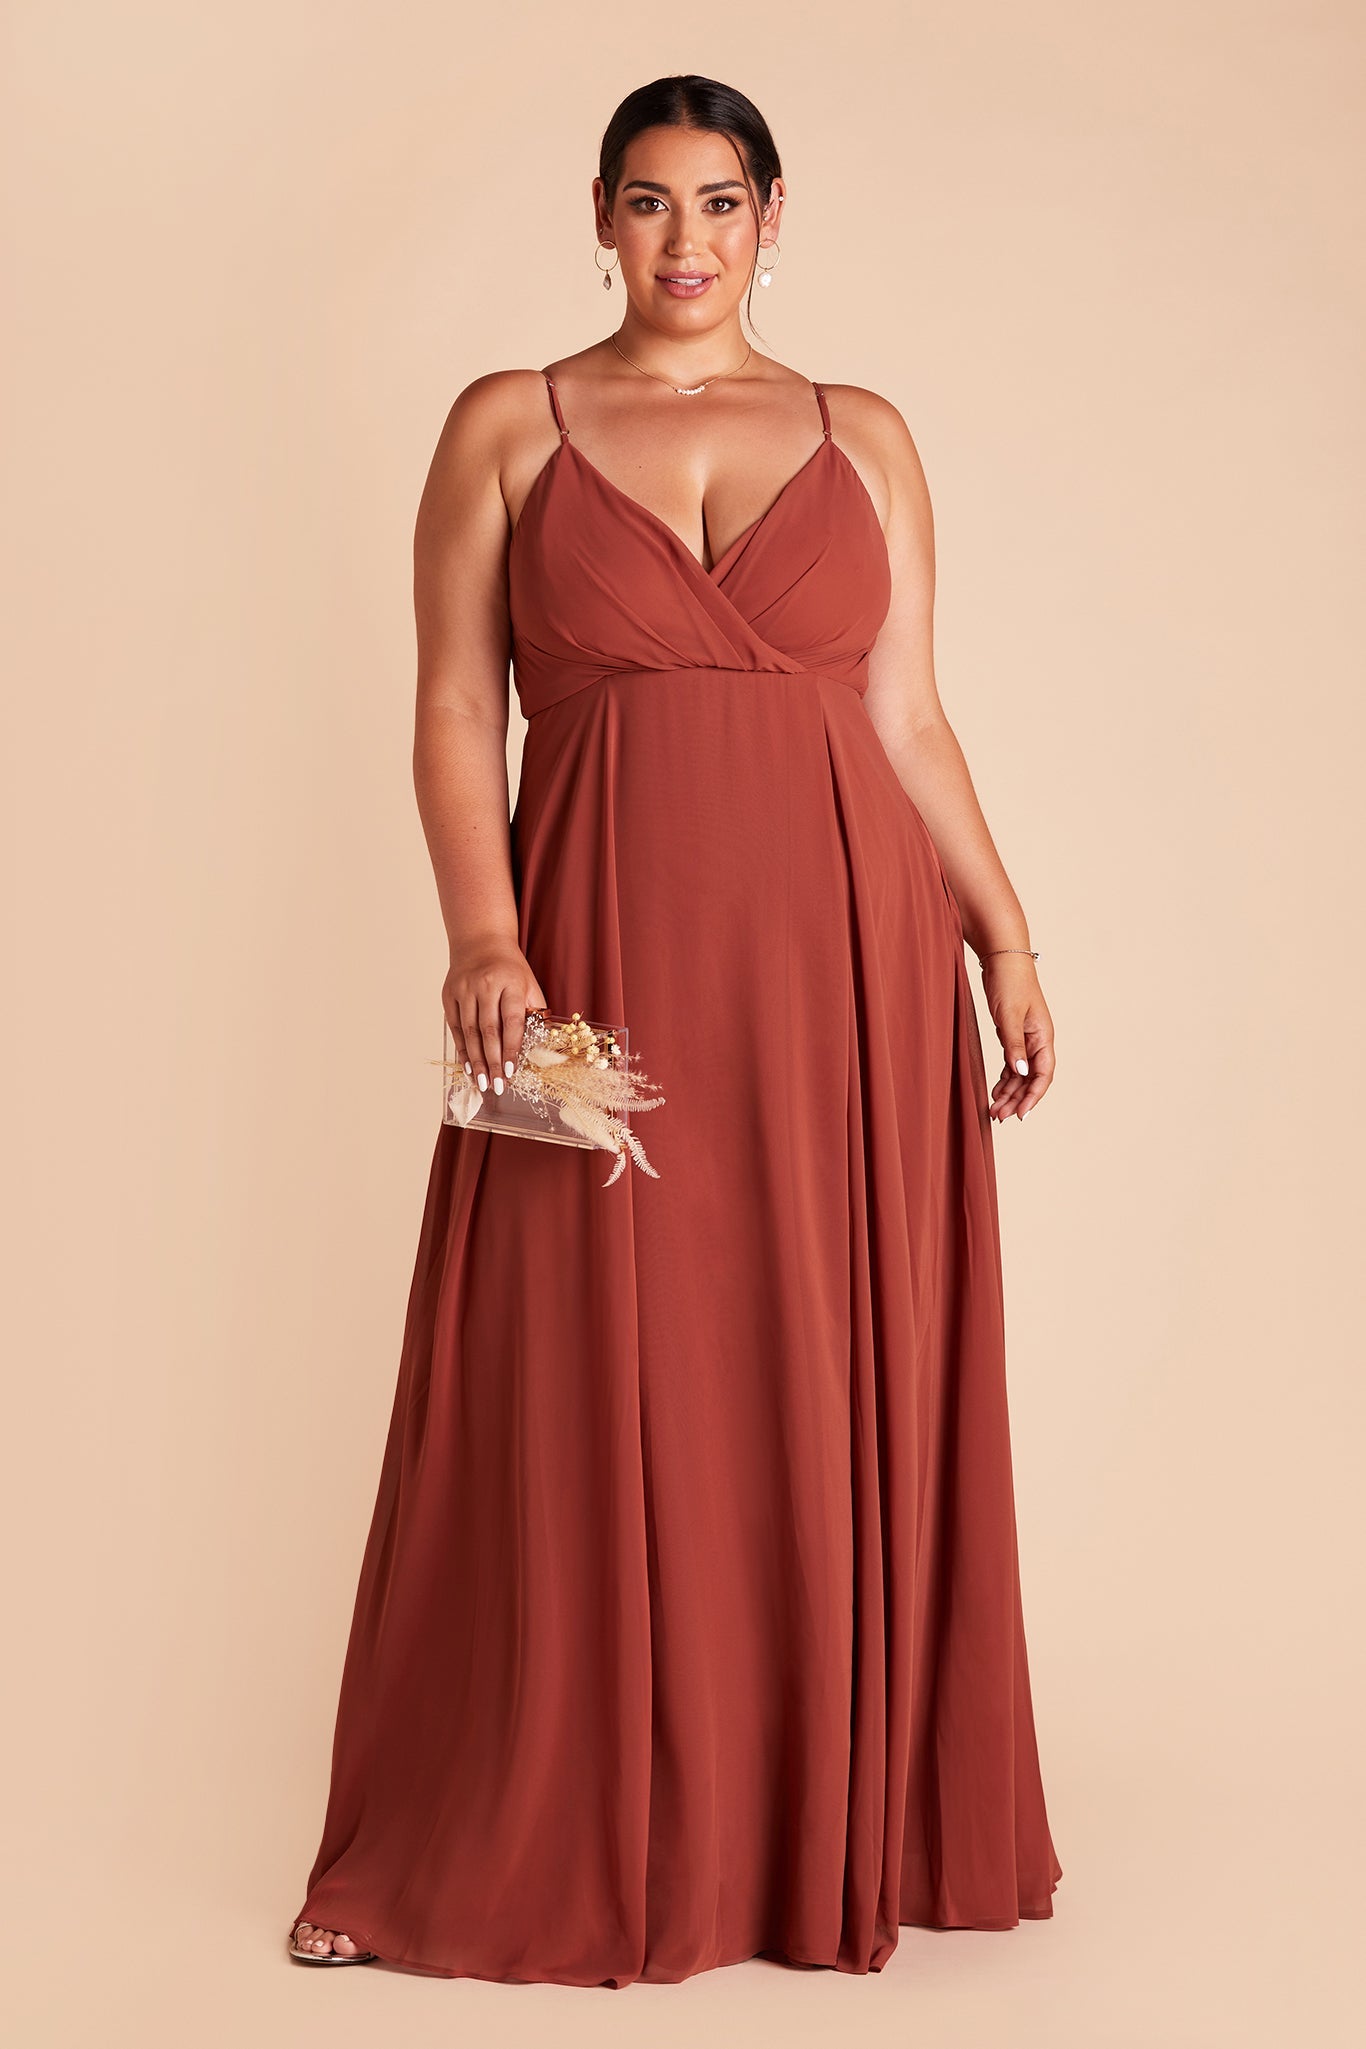 Kaia plus-size bridesmaid dress with pocket in spice chiffon by Birdy Grey, front view